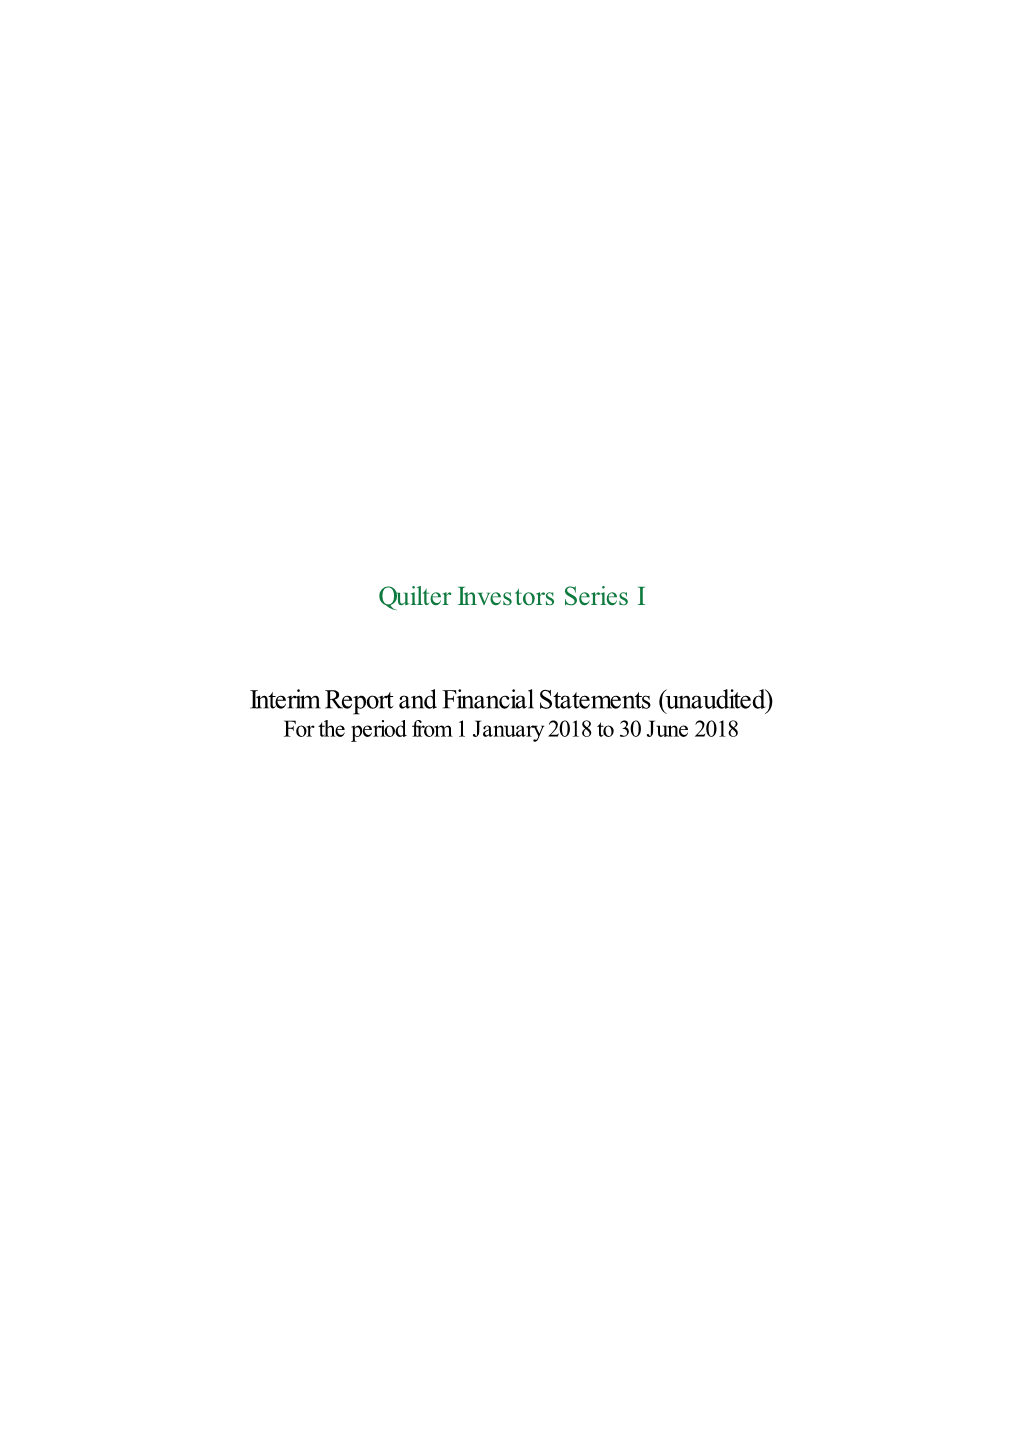 Quilter Investors Series I Interim Report and Financial Statements